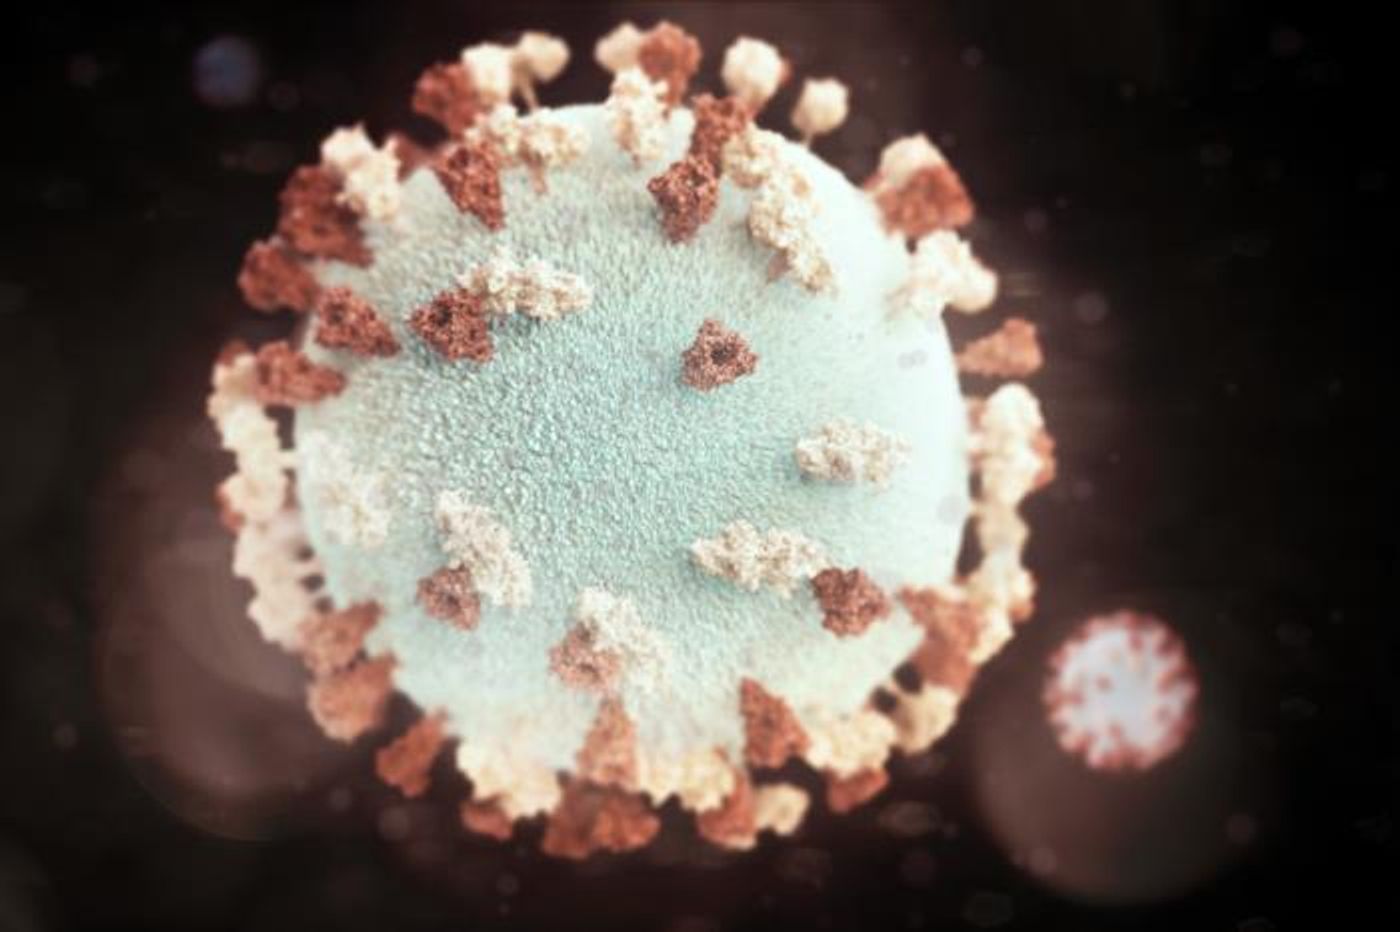 An illustration of a spherical-shaped mumps virus particle studded with reddish-brown glycoprotein tubercles called F-proteins (fusion), and beige glycoprotein tubercles, called HN-proteins / Credit: CDC/ Allison M. Maiuri, MPH, CHES / Illustrator: Alissa Eckert